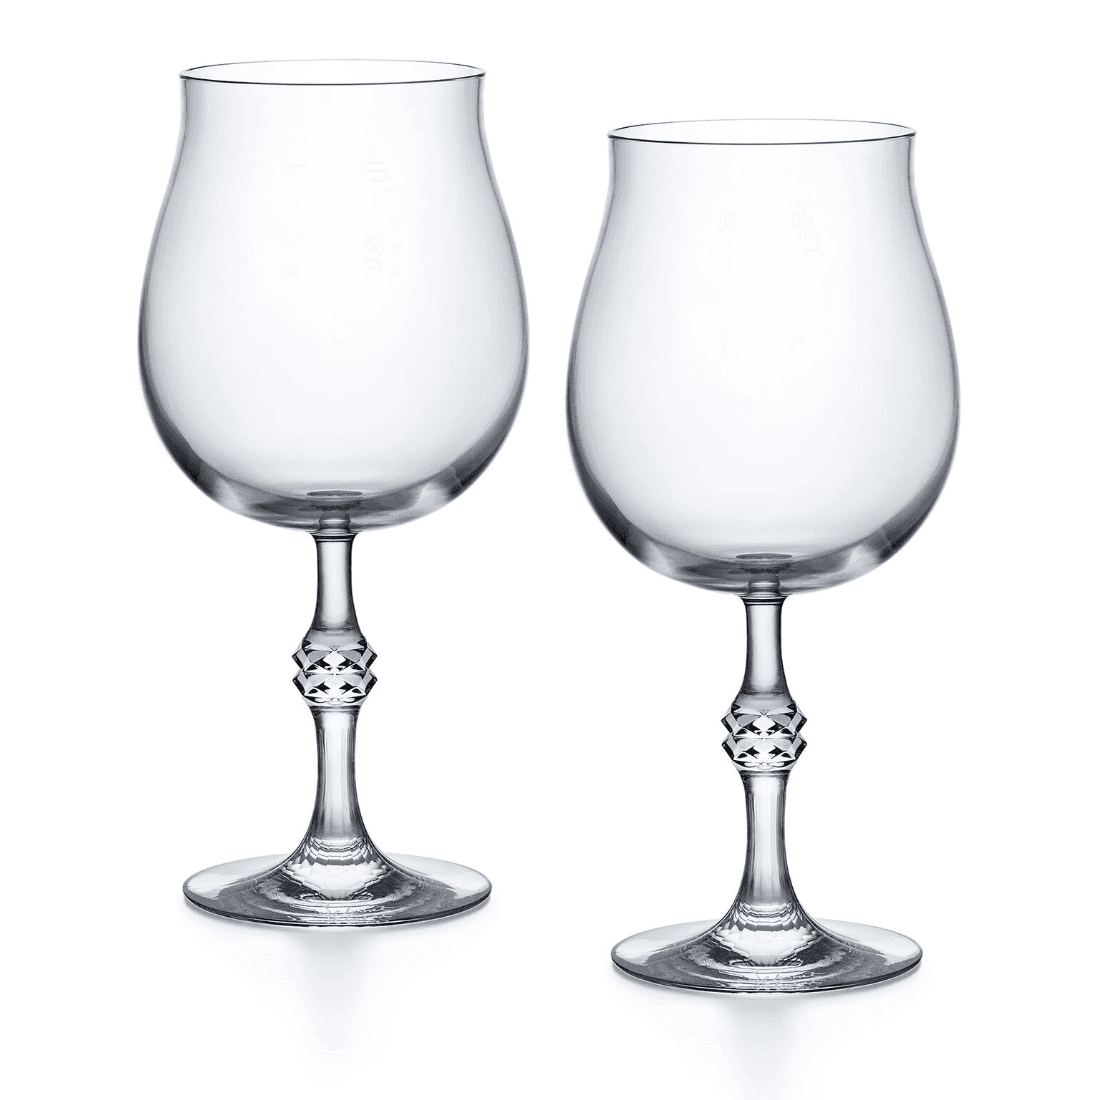 Baccarat JCB Passion Wine Glasses, set of two 0